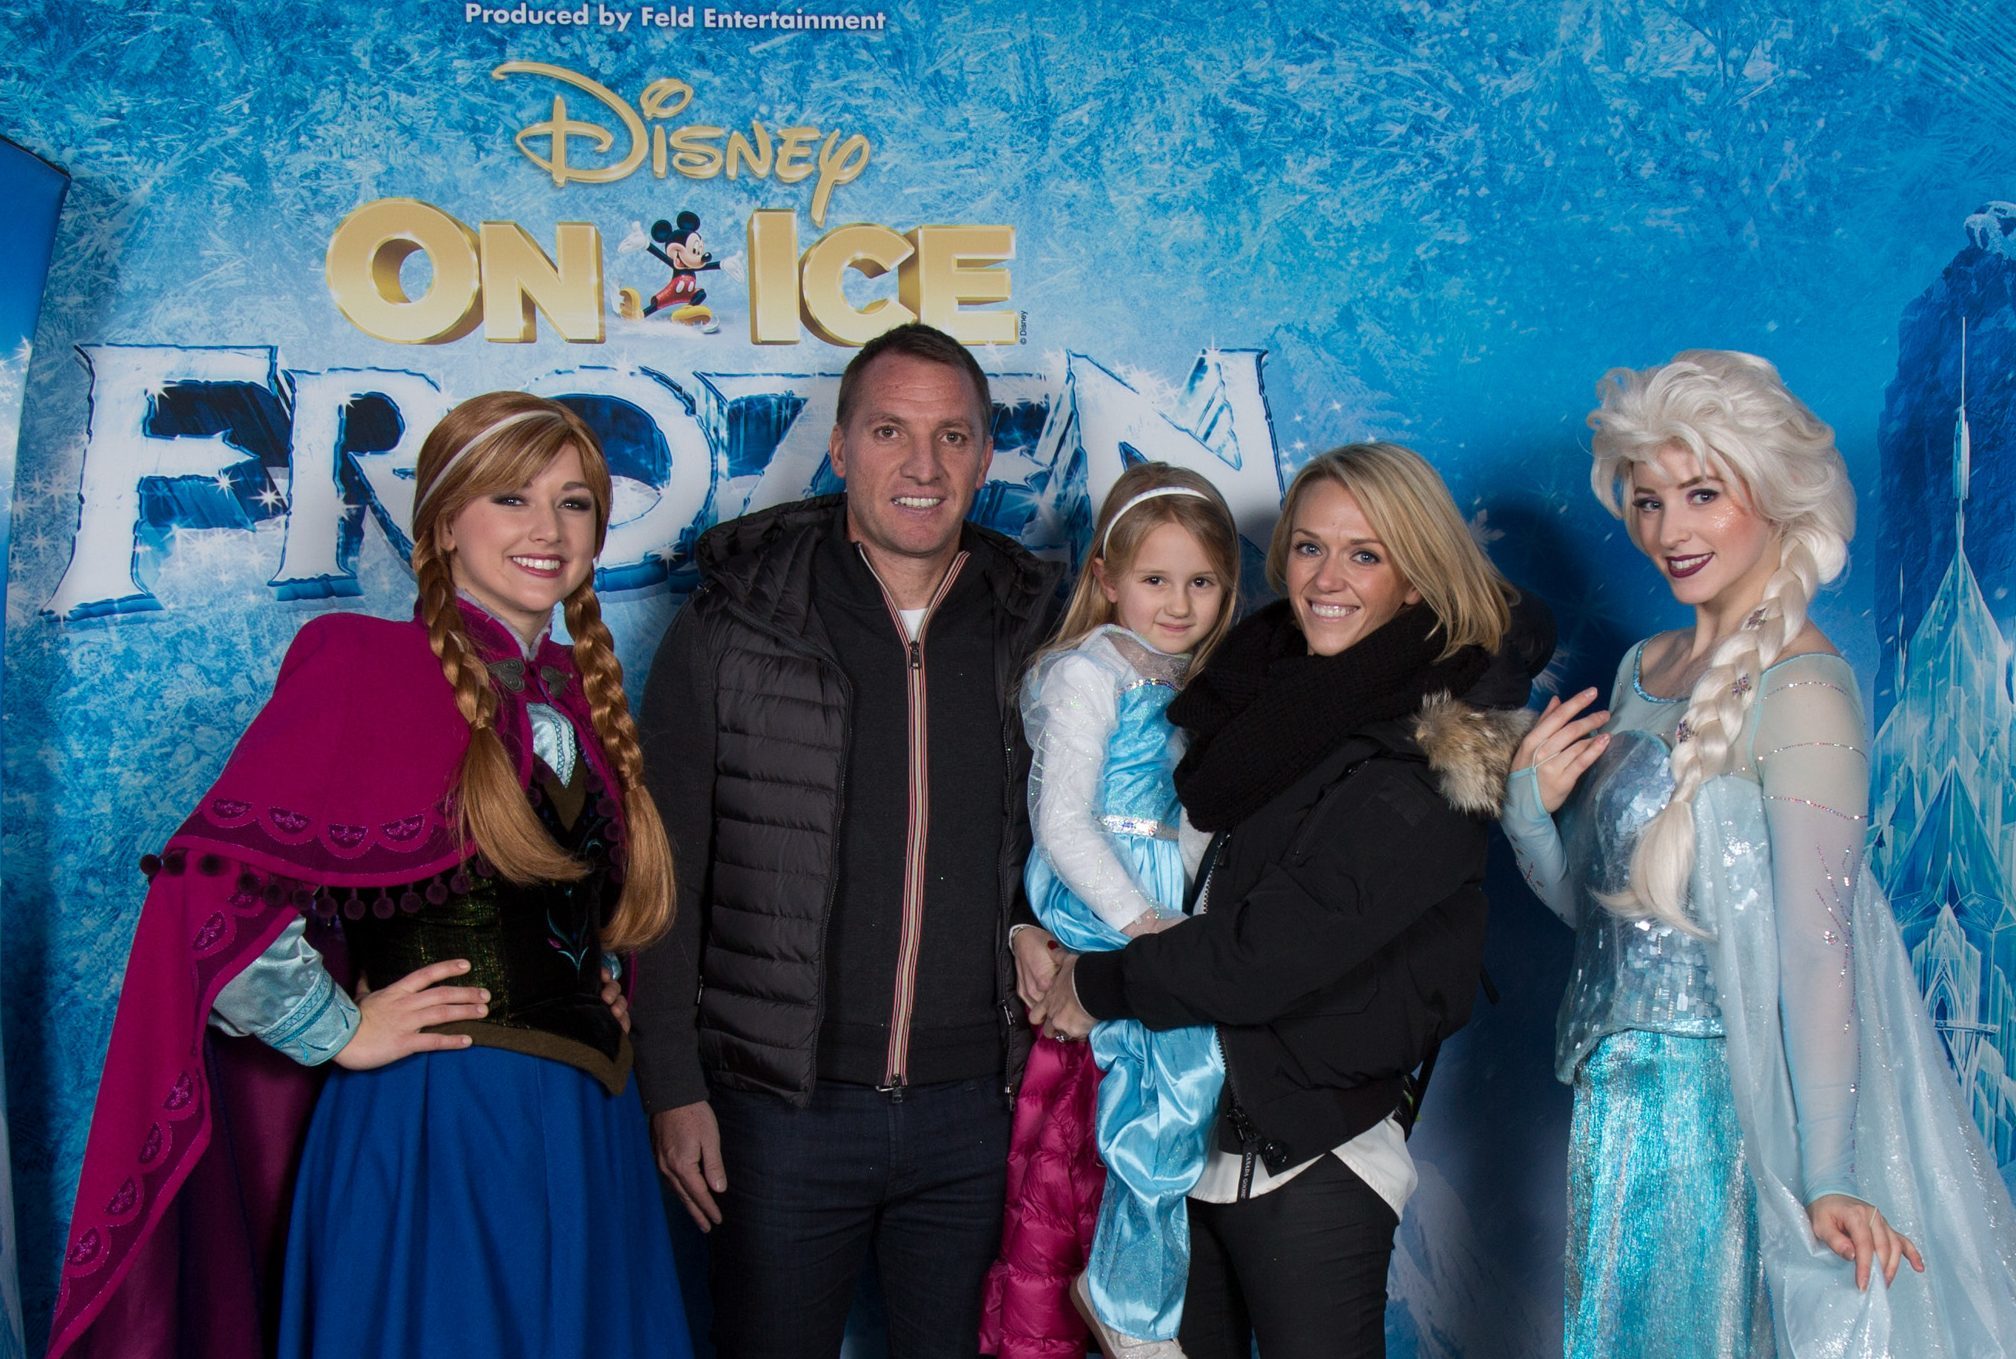 Manager for Celtic Brendan Rodgers and family meet Anna and Elsa (Disney on Ice)